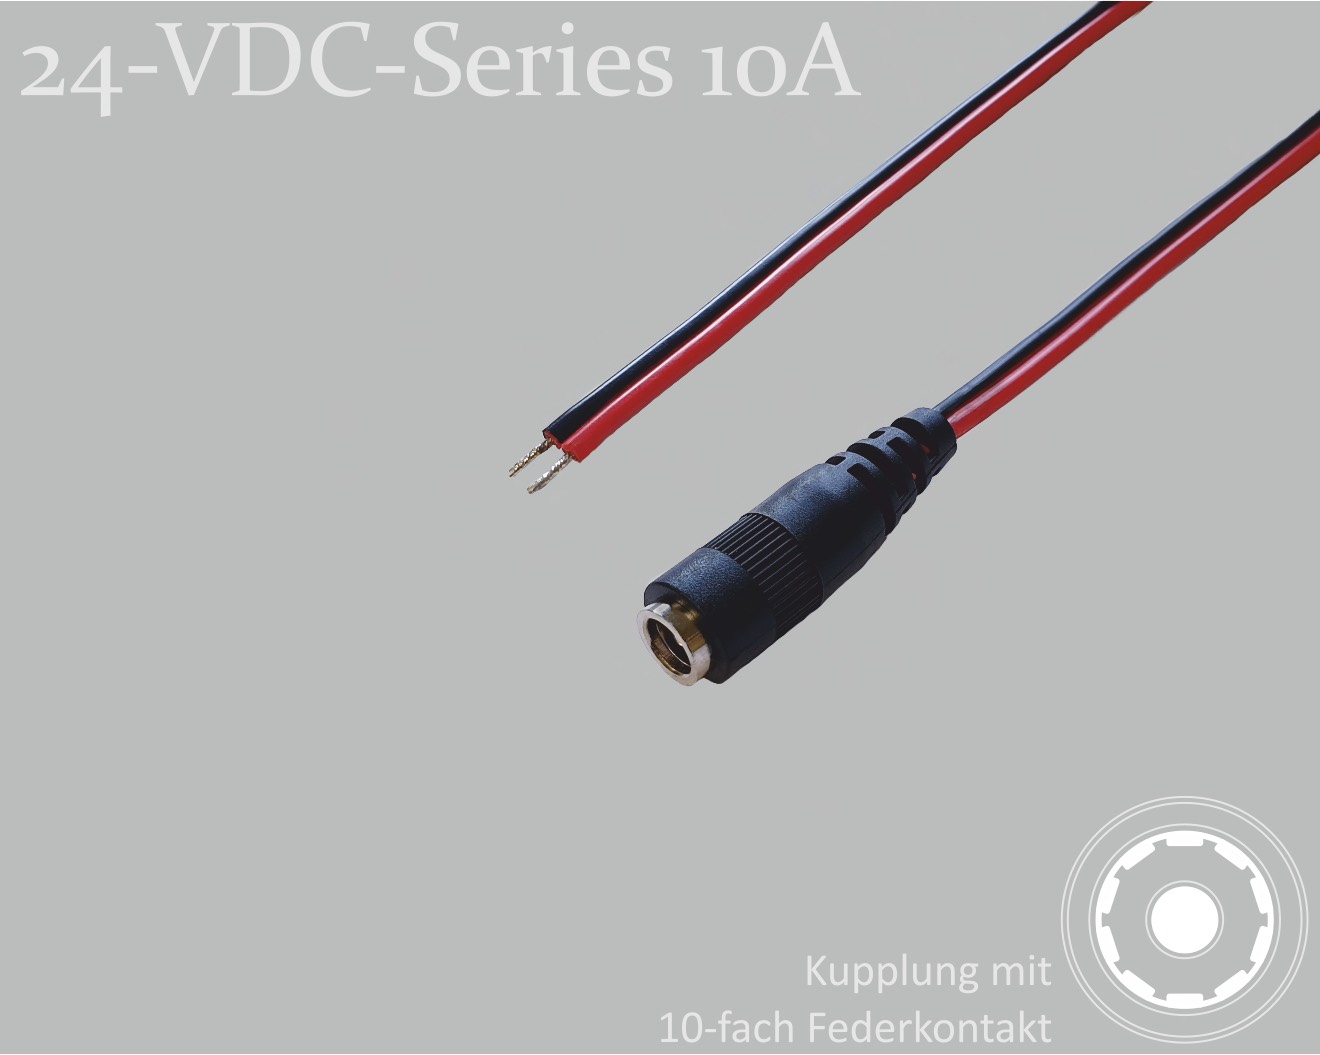 24-VDC-Series 10A, DC connection cable, DC coupling with 10-spring contact 2.1x5.5mm, flat cable 2x0.75mm², red/black, tinned ends, 1.5m